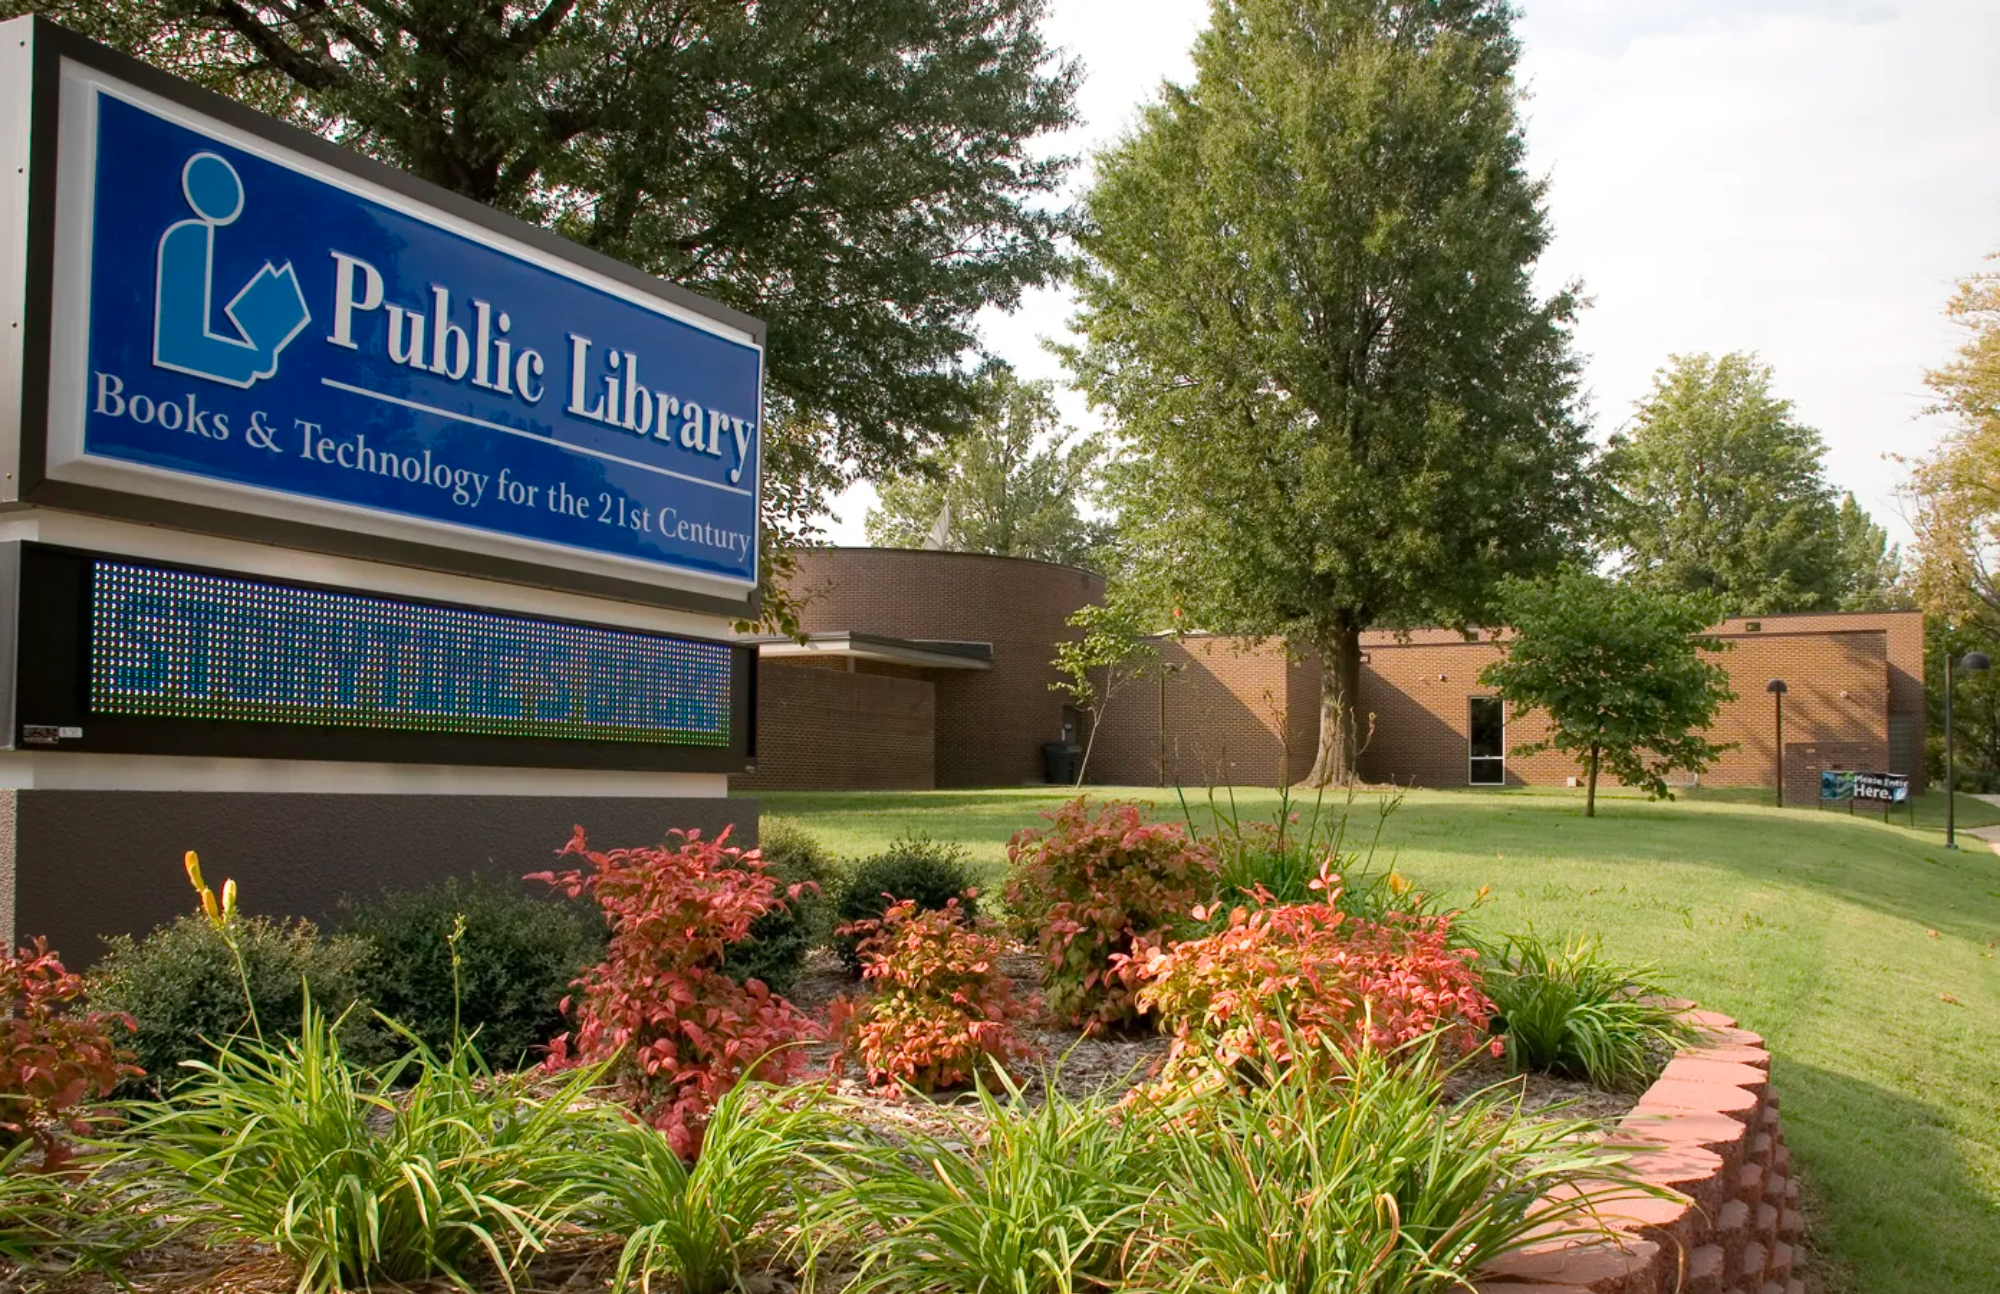 Front walkway with a blue sign that reads "Craighead County Jonesboro Public Library"